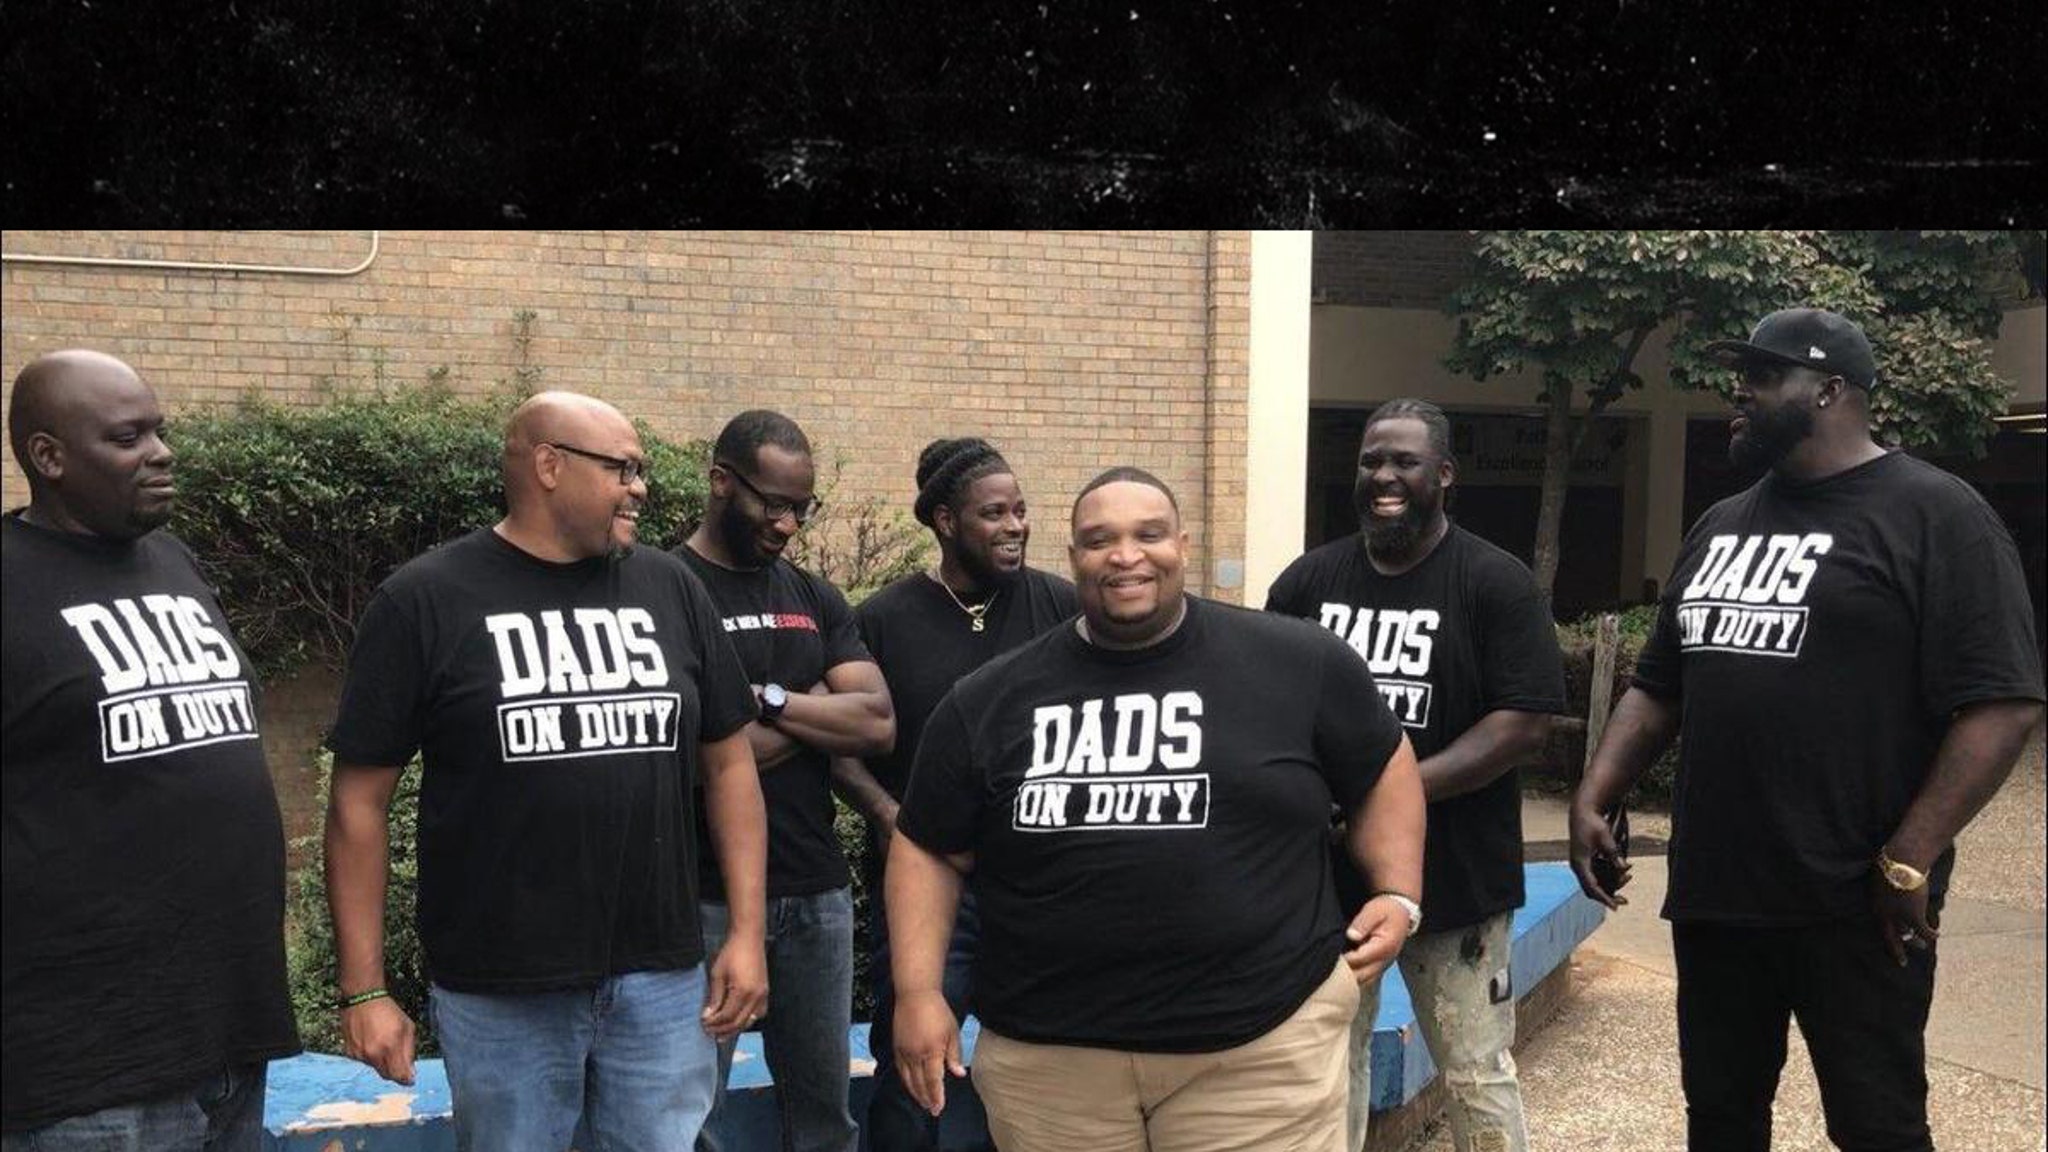 Fathers Form 'Dads on Duty' After Many Fights at Louisiana High School